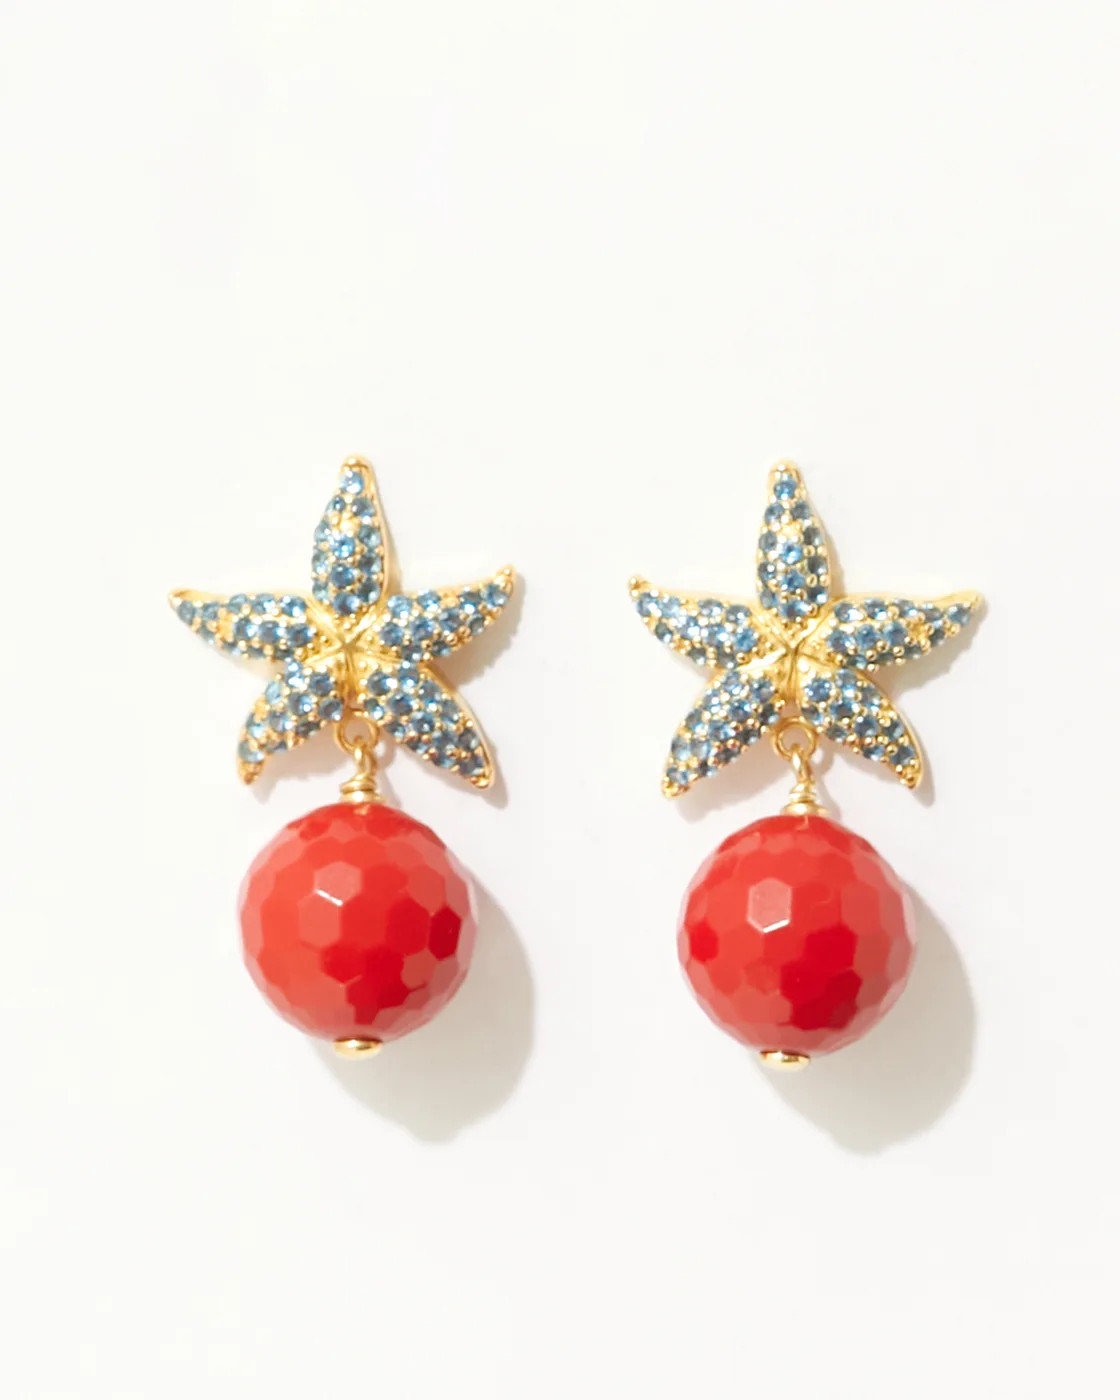 Krill Starfish Silver Earrings with Red Agate Drops